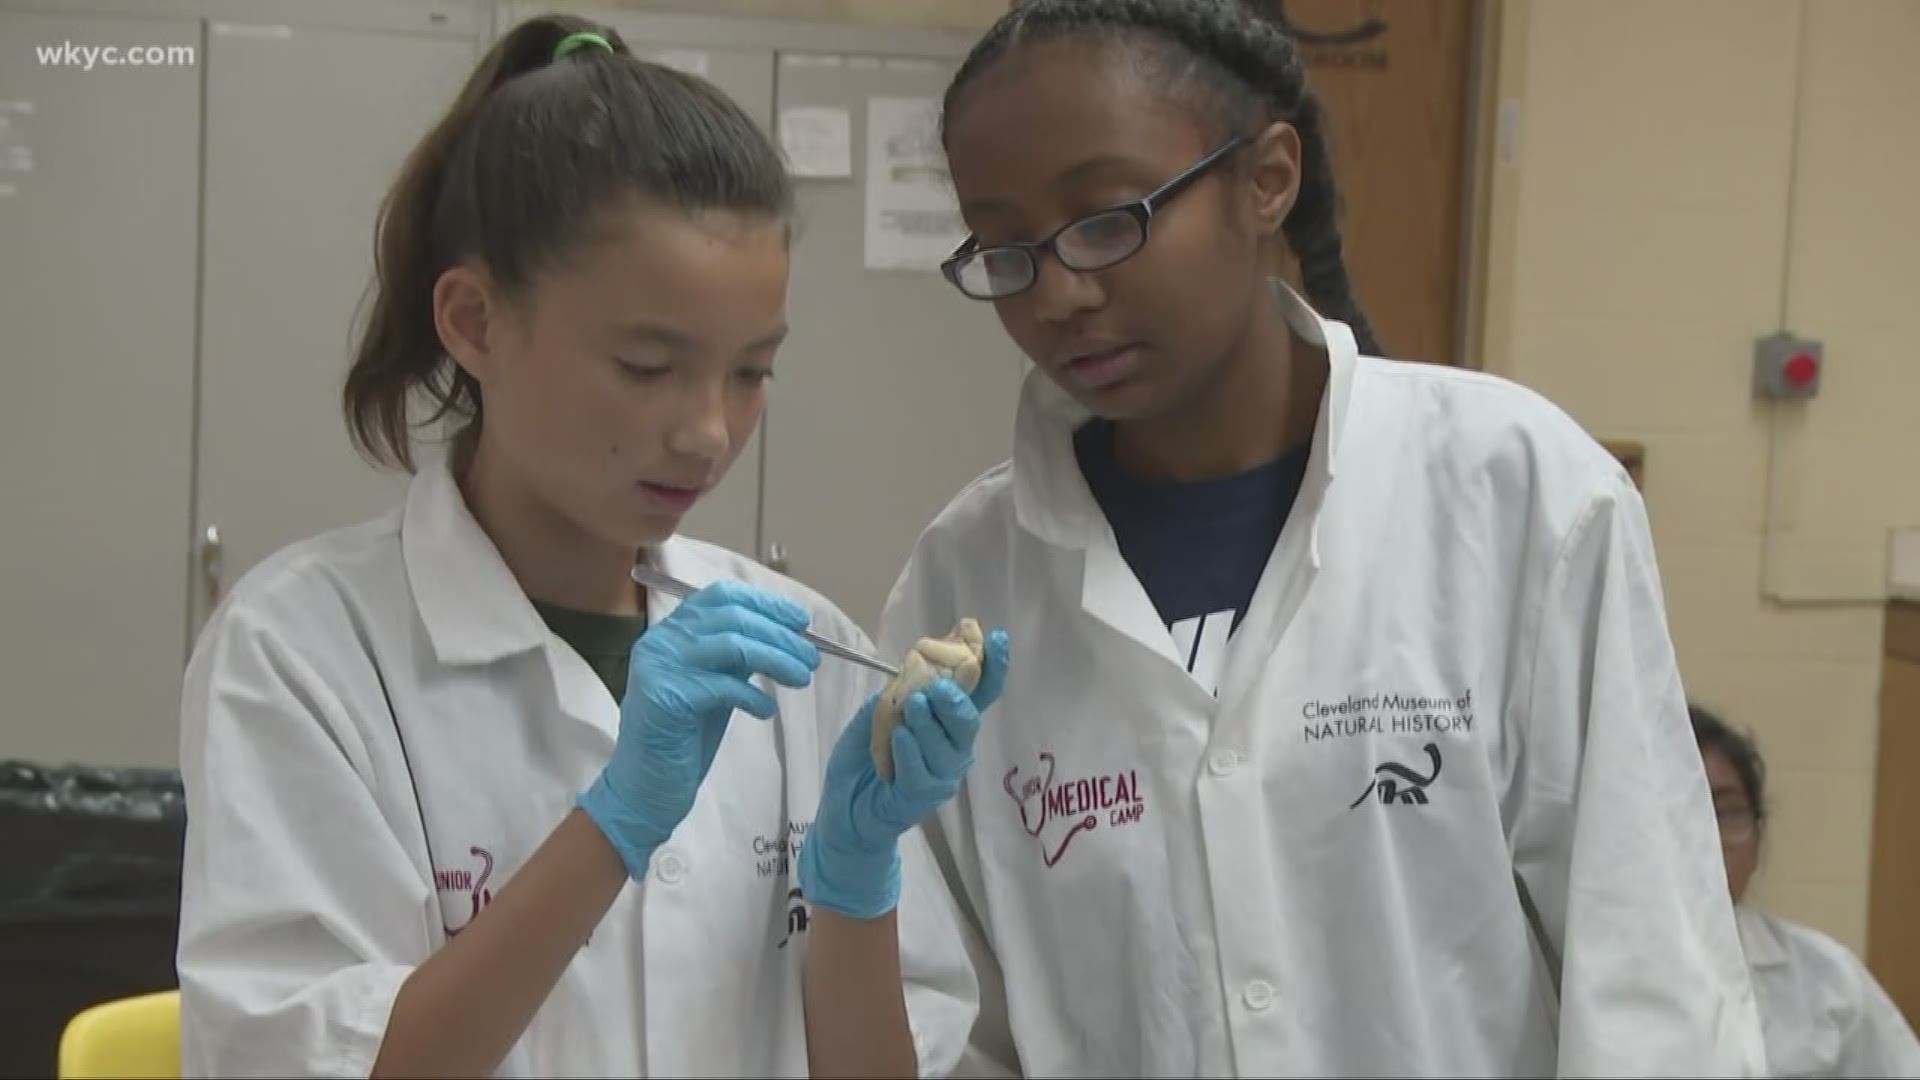 There are all kinds of summer camps for kids, but for Friday's Girls in STEM, we found one that puts scalpels and forceps in kids' hands.